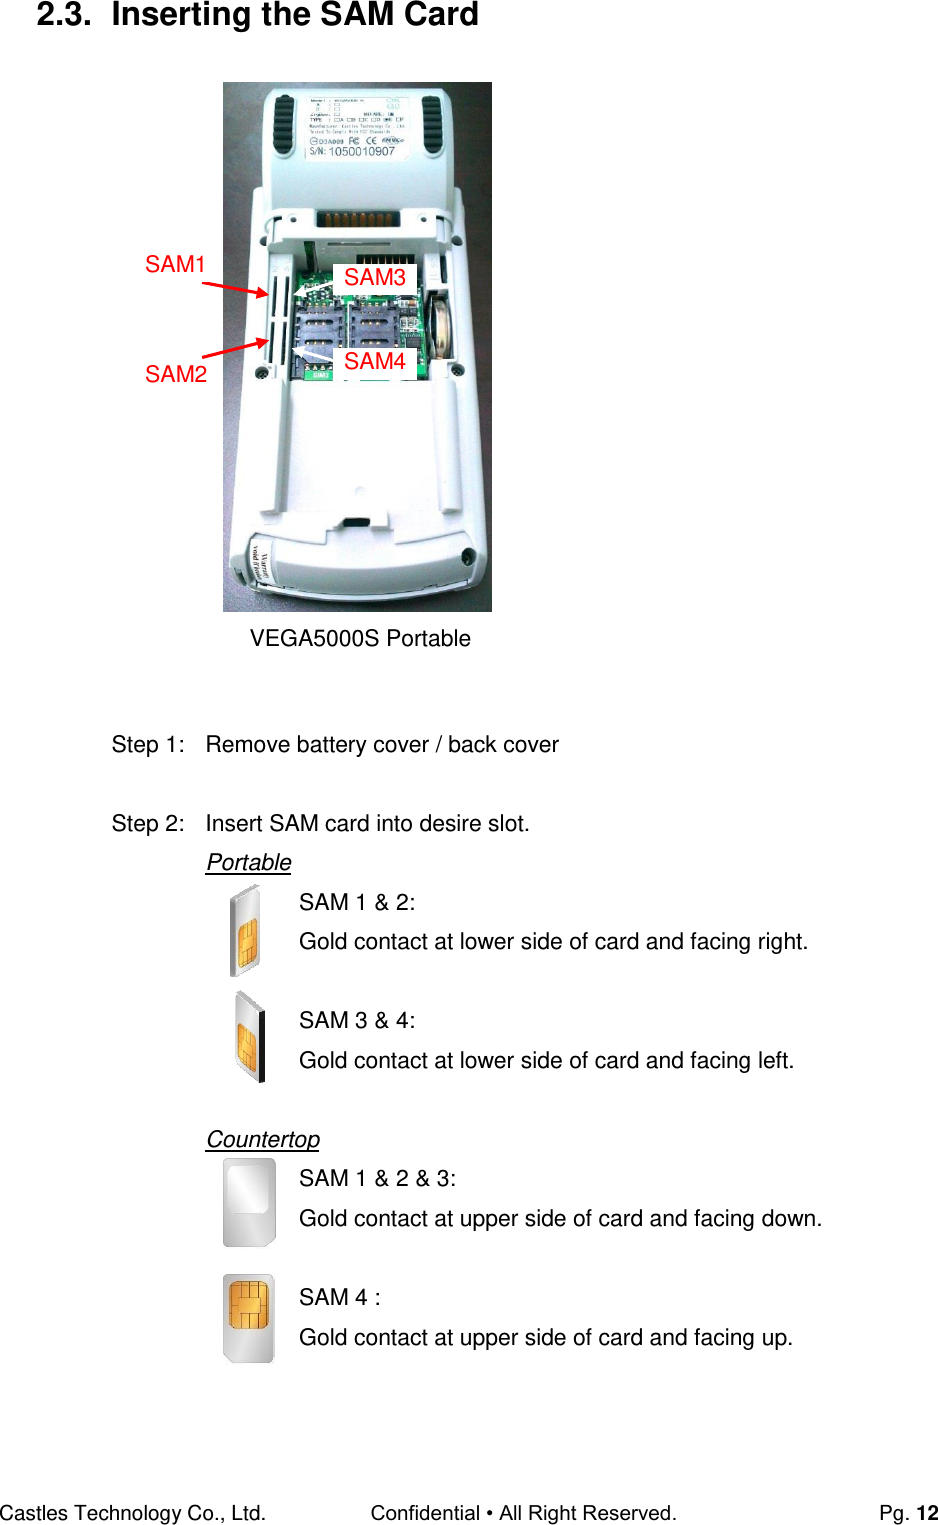 Castles Technology Co., Ltd. Confidential • All Right Reserved.  Pg. 12 2.3.  Inserting the SAM Card                       Step 1:  Remove battery cover / back cover  Step 2:  Insert SAM card into desire slot. Portable SAM 1 &amp; 2: Gold contact at lower side of card and facing right.  SAM 3 &amp; 4:  Gold contact at lower side of card and facing left.  Countertop SAM 1 &amp; 2 &amp; 3:  Gold contact at upper side of card and facing down.  SAM 4 : Gold contact at upper side of card and facing up.    VEGA5000S Portable SAM1 SAM2 SAM3 SAM4  